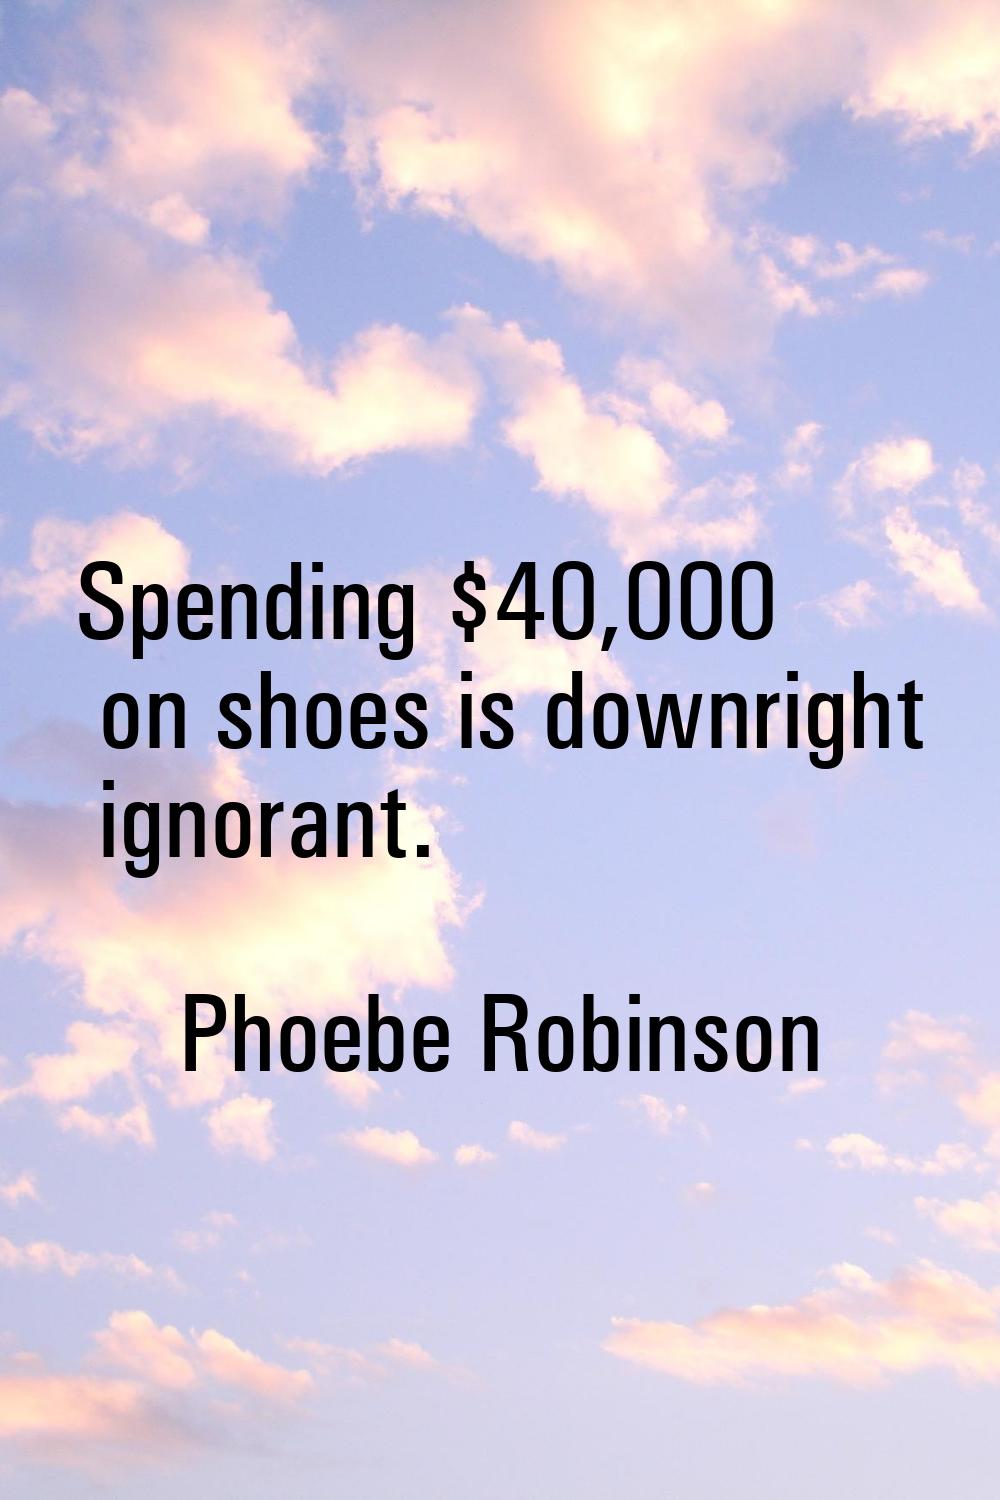 Spending $40,000 on shoes is downright ignorant.